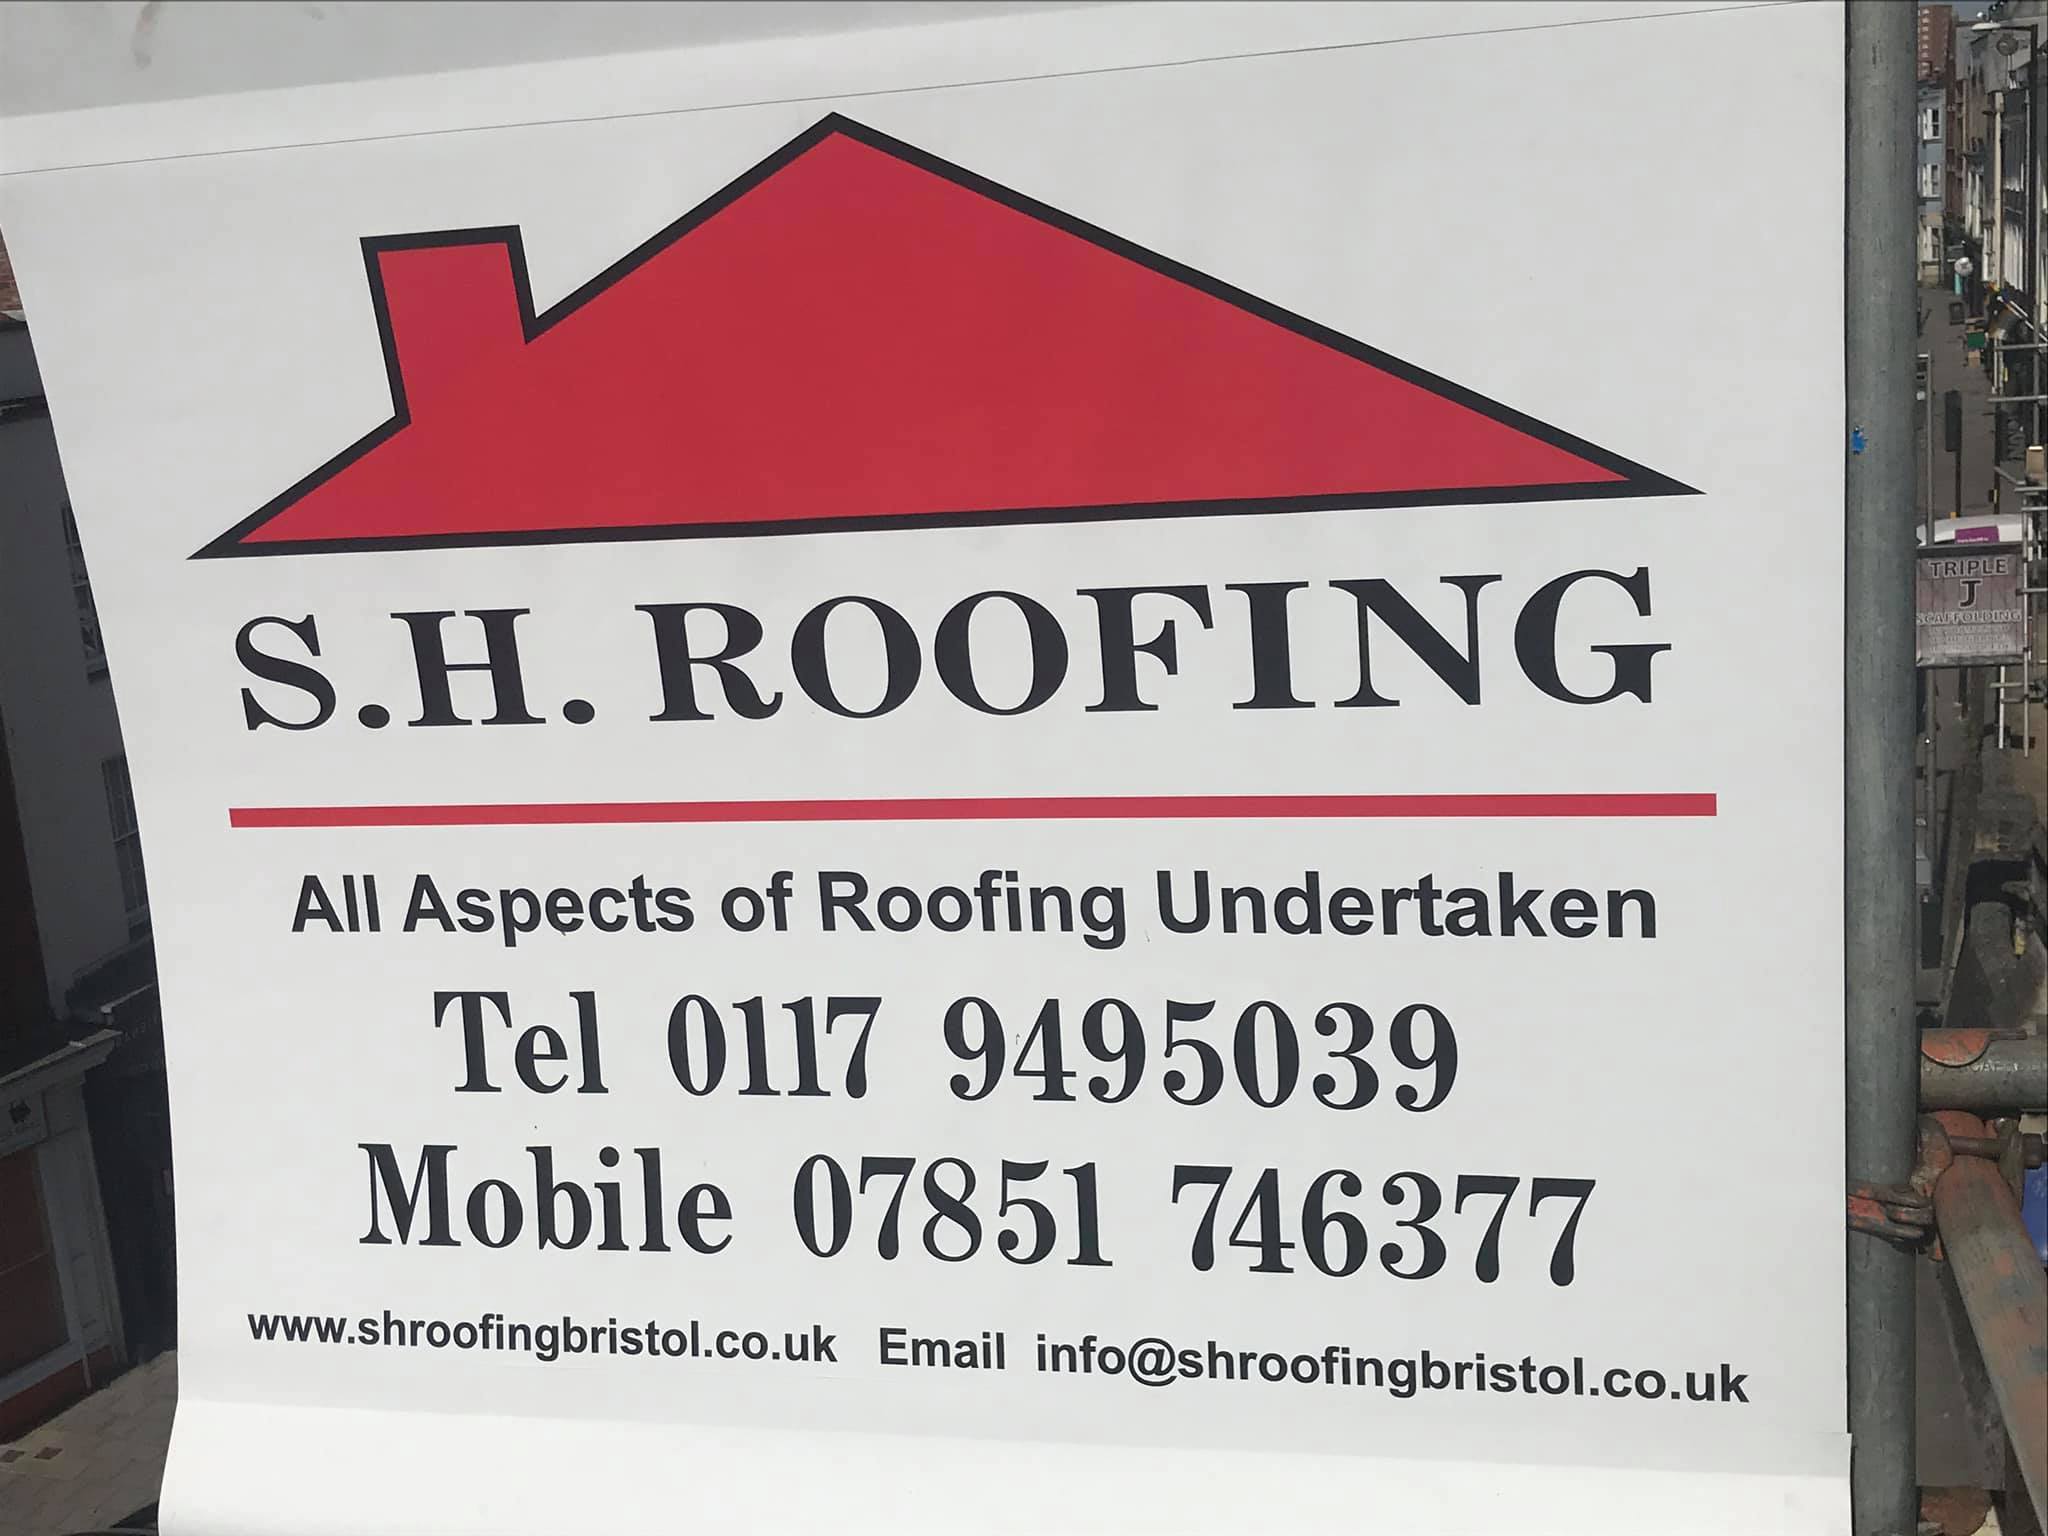 S.H. Roofing